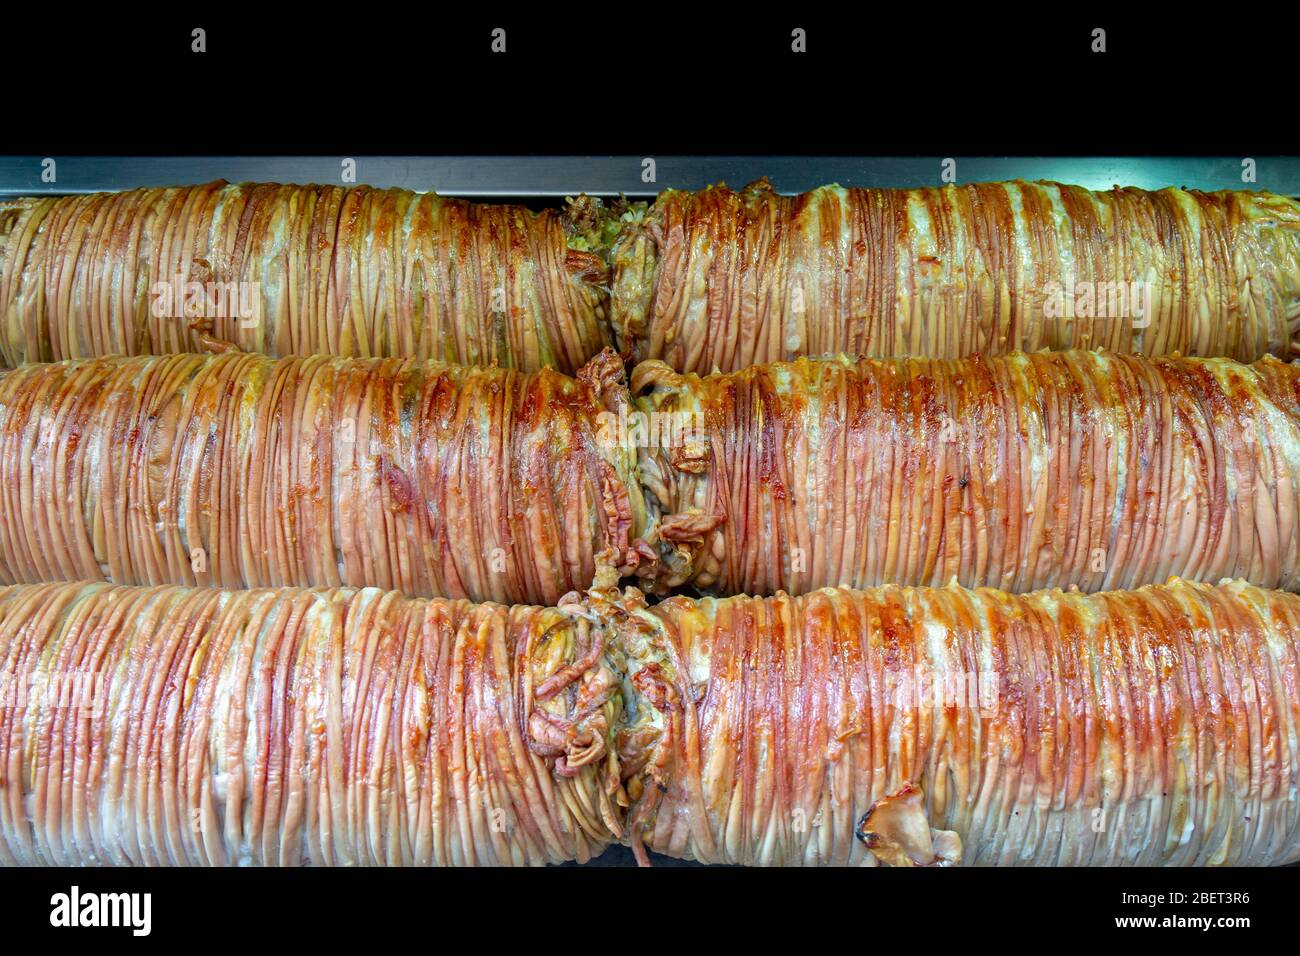 Close-up view of grilled kokorec (sheep's intestines). Stock Photo